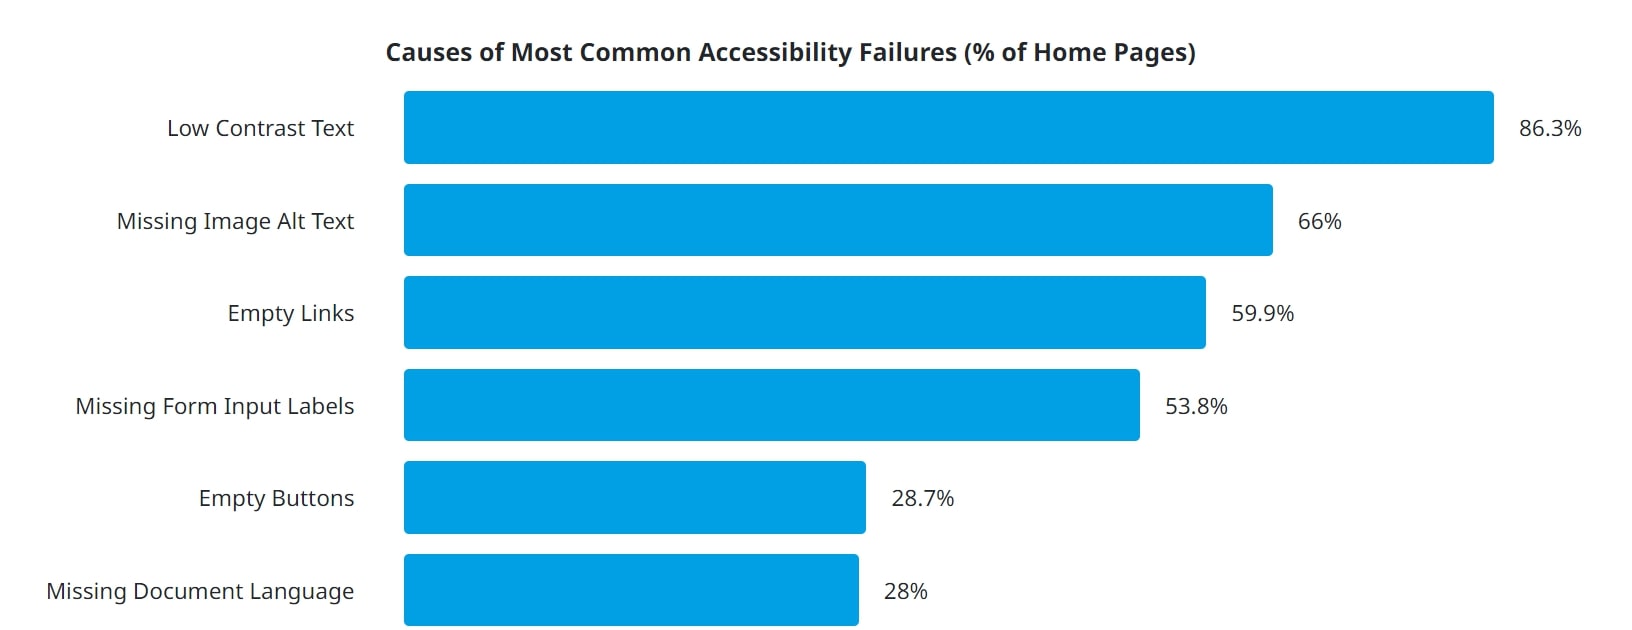 Causes of accessibility failures graph